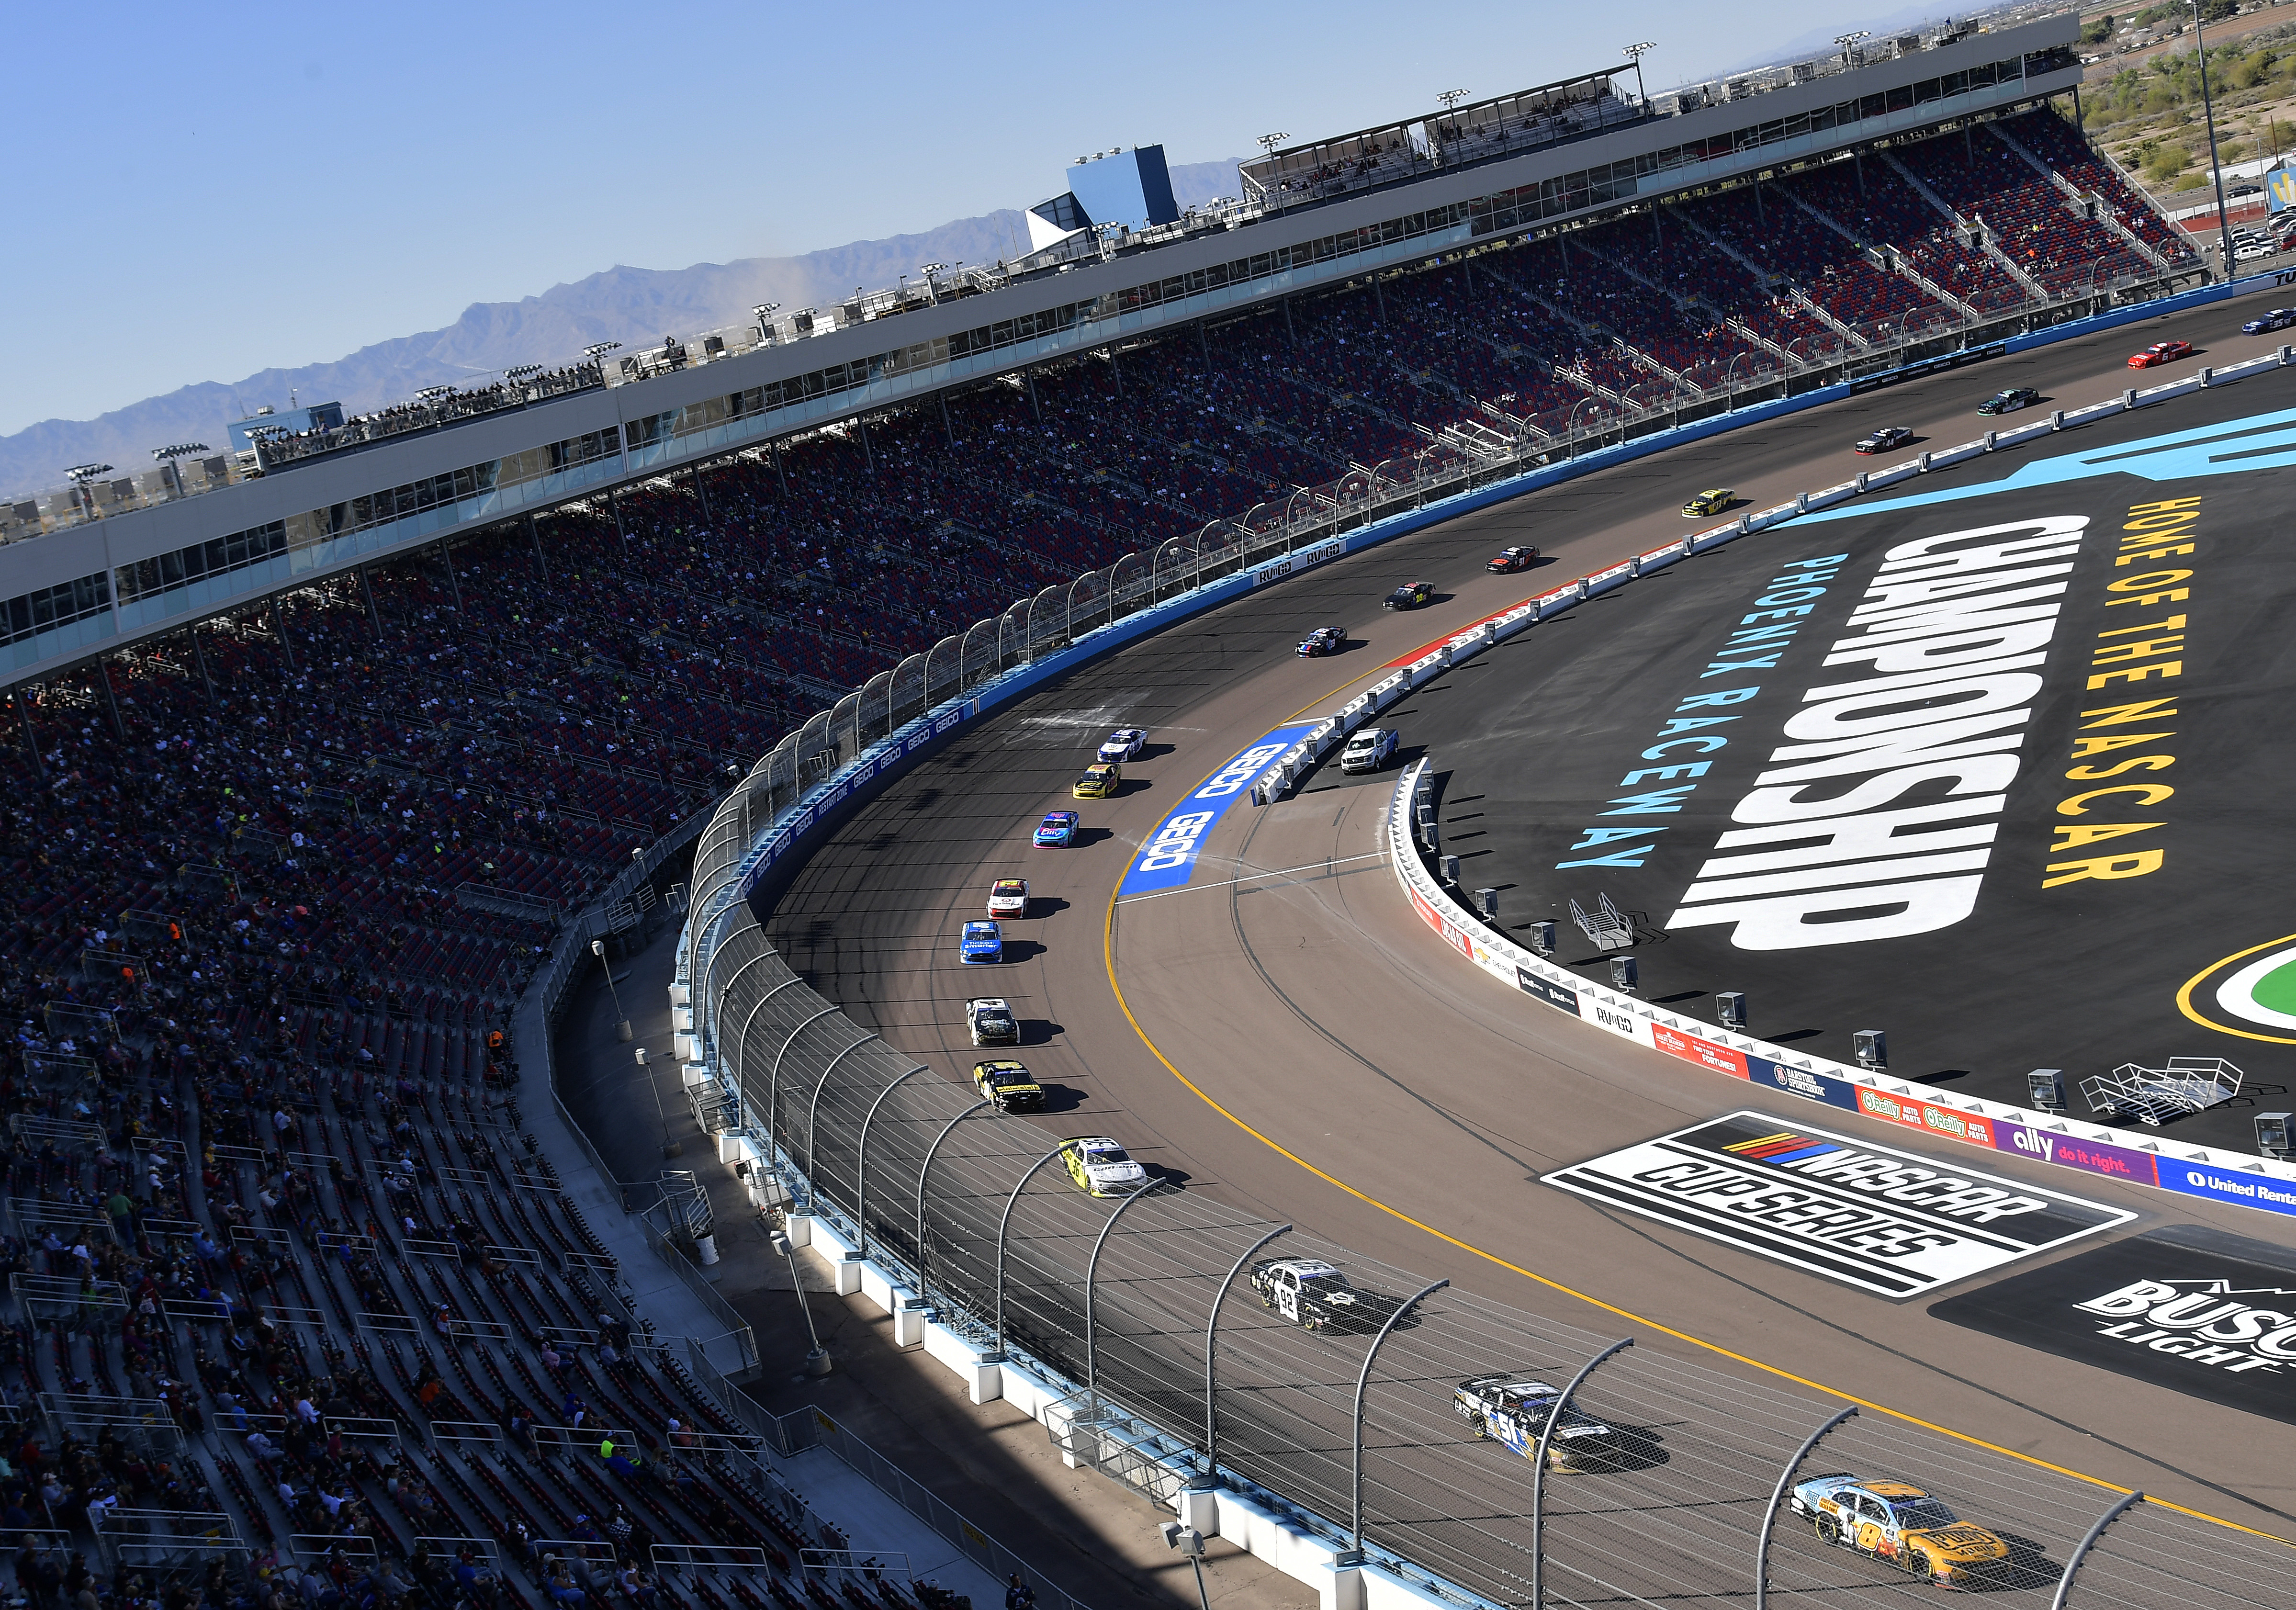 A general view of racing during the NASCAR Xfinity Series United Rentals 200 at Phoenix Raceway on March 12, 2022 in Avondale, Arizona.